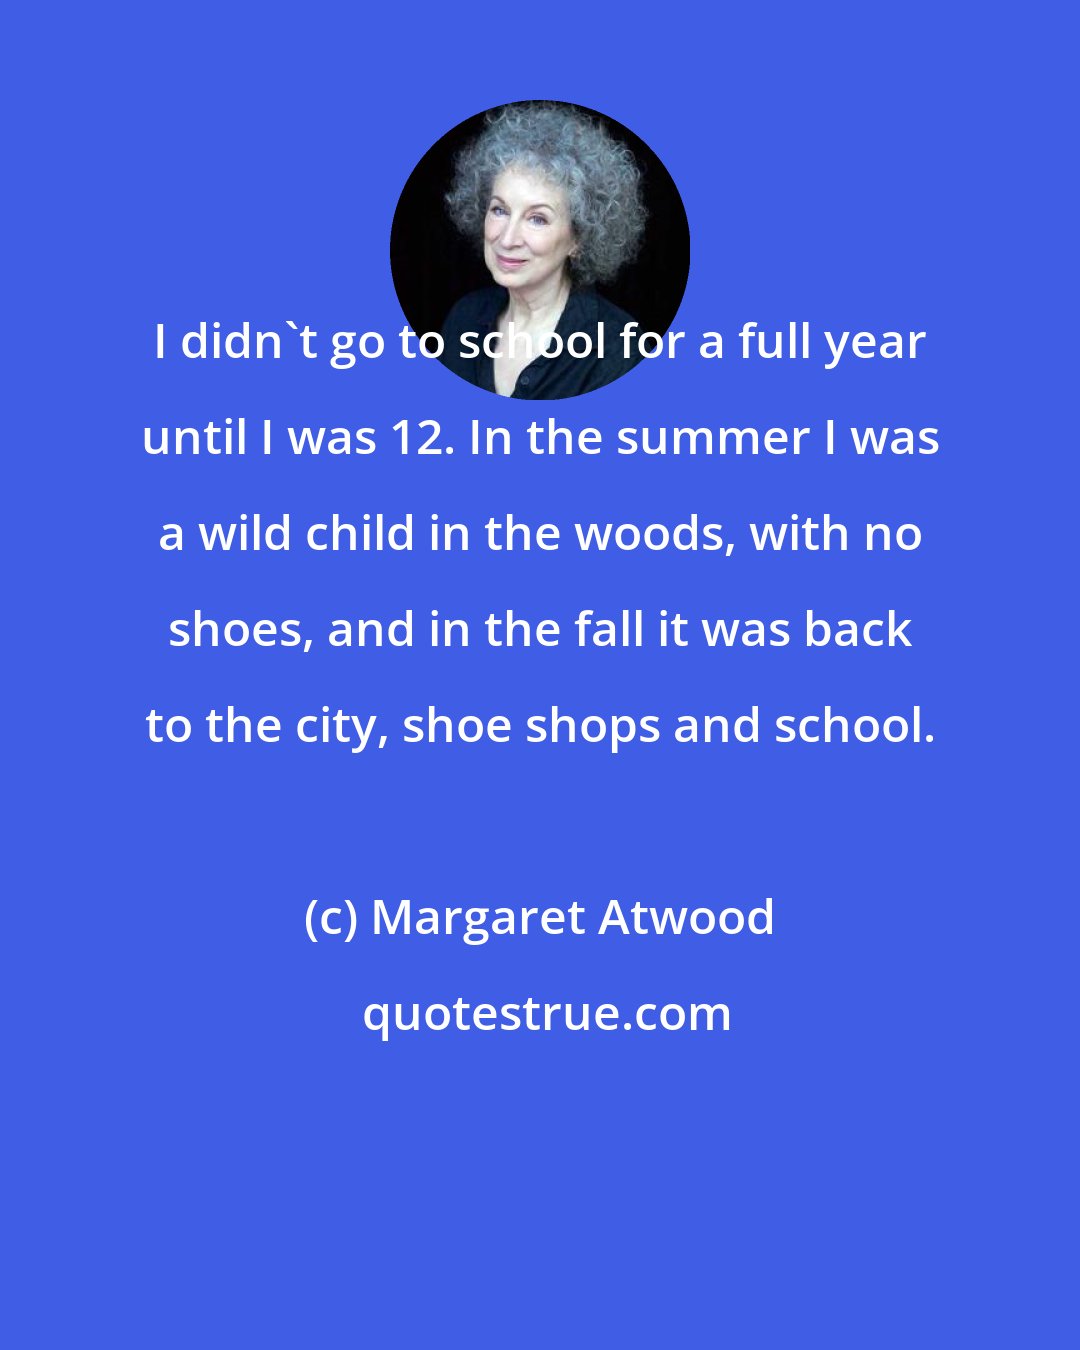 Margaret Atwood: I didn't go to school for a full year until I was 12. In the summer I was a wild child in the woods, with no shoes, and in the fall it was back to the city, shoe shops and school.